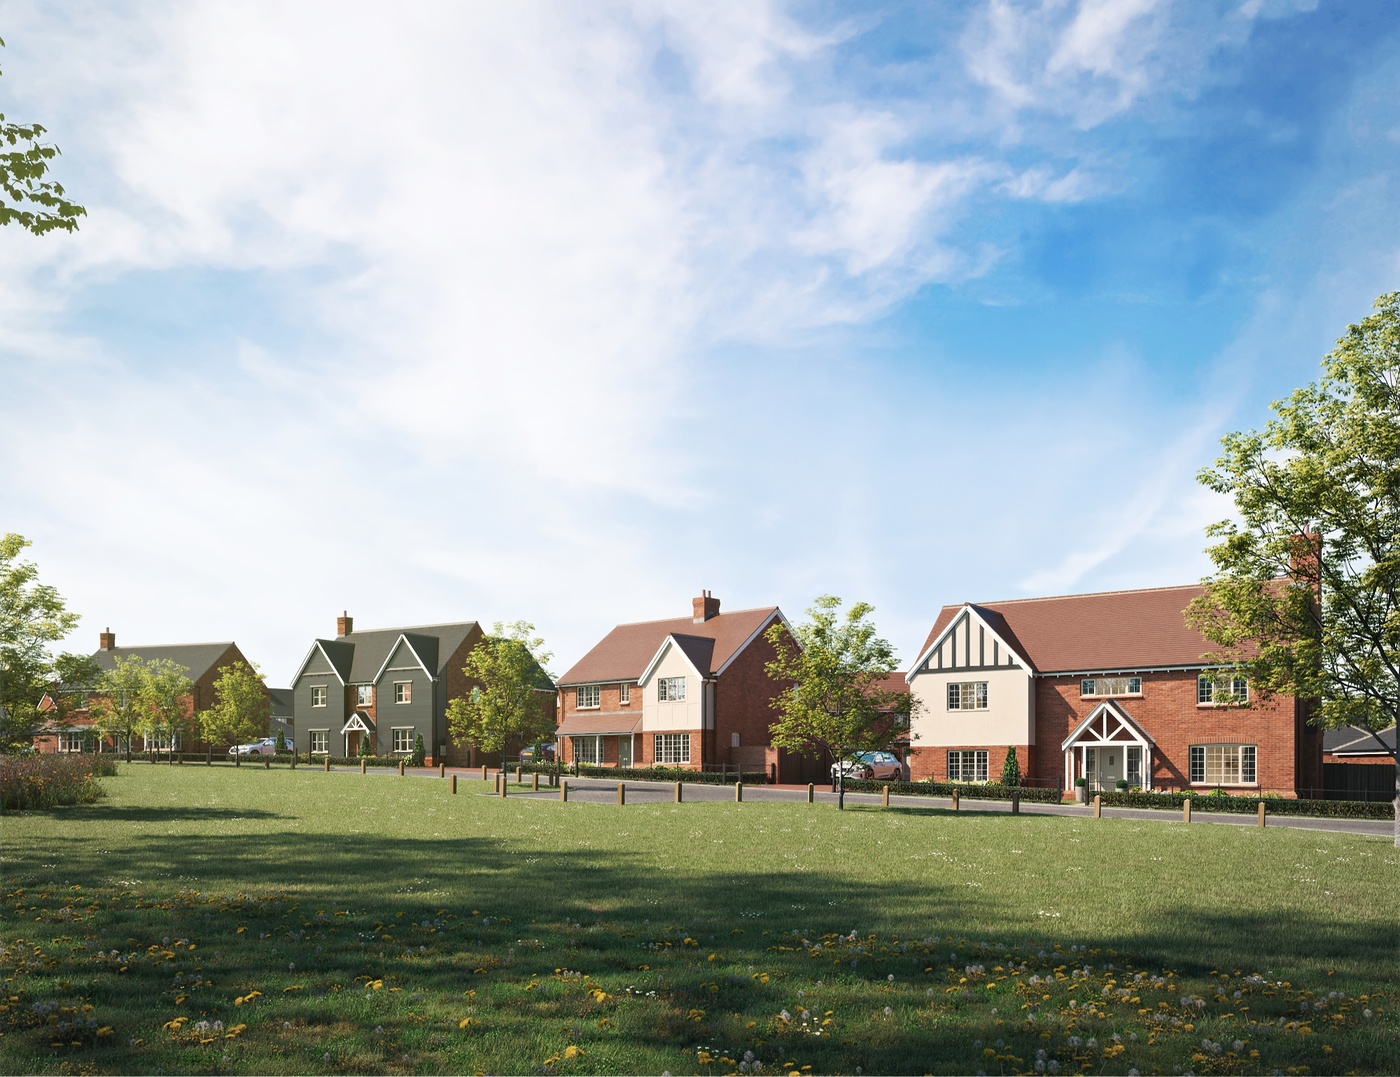 Introducing Felsted Gate by Mulberry Homes - Mulberry Homes